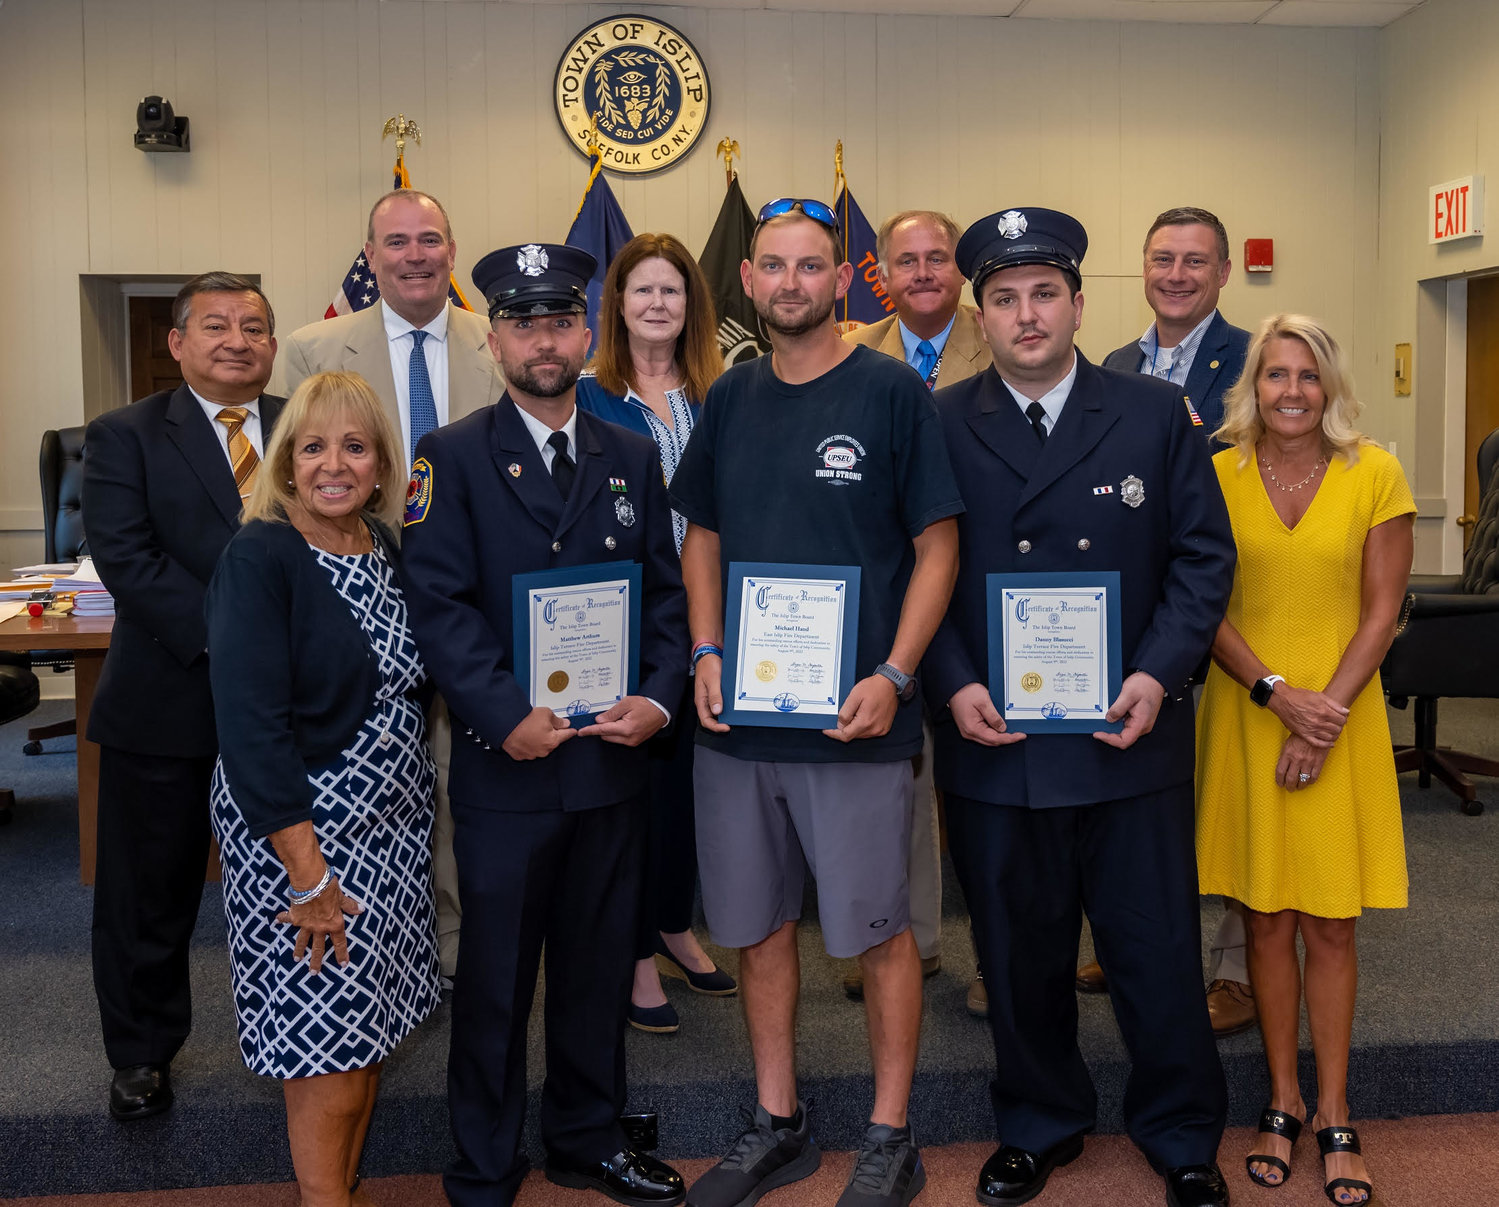 Angie Carpenter at the monthly Islip Town Board Meeting. Members of the Islip Terrace and East Islip Fire Departments were awarded Certificates of Recogmition.